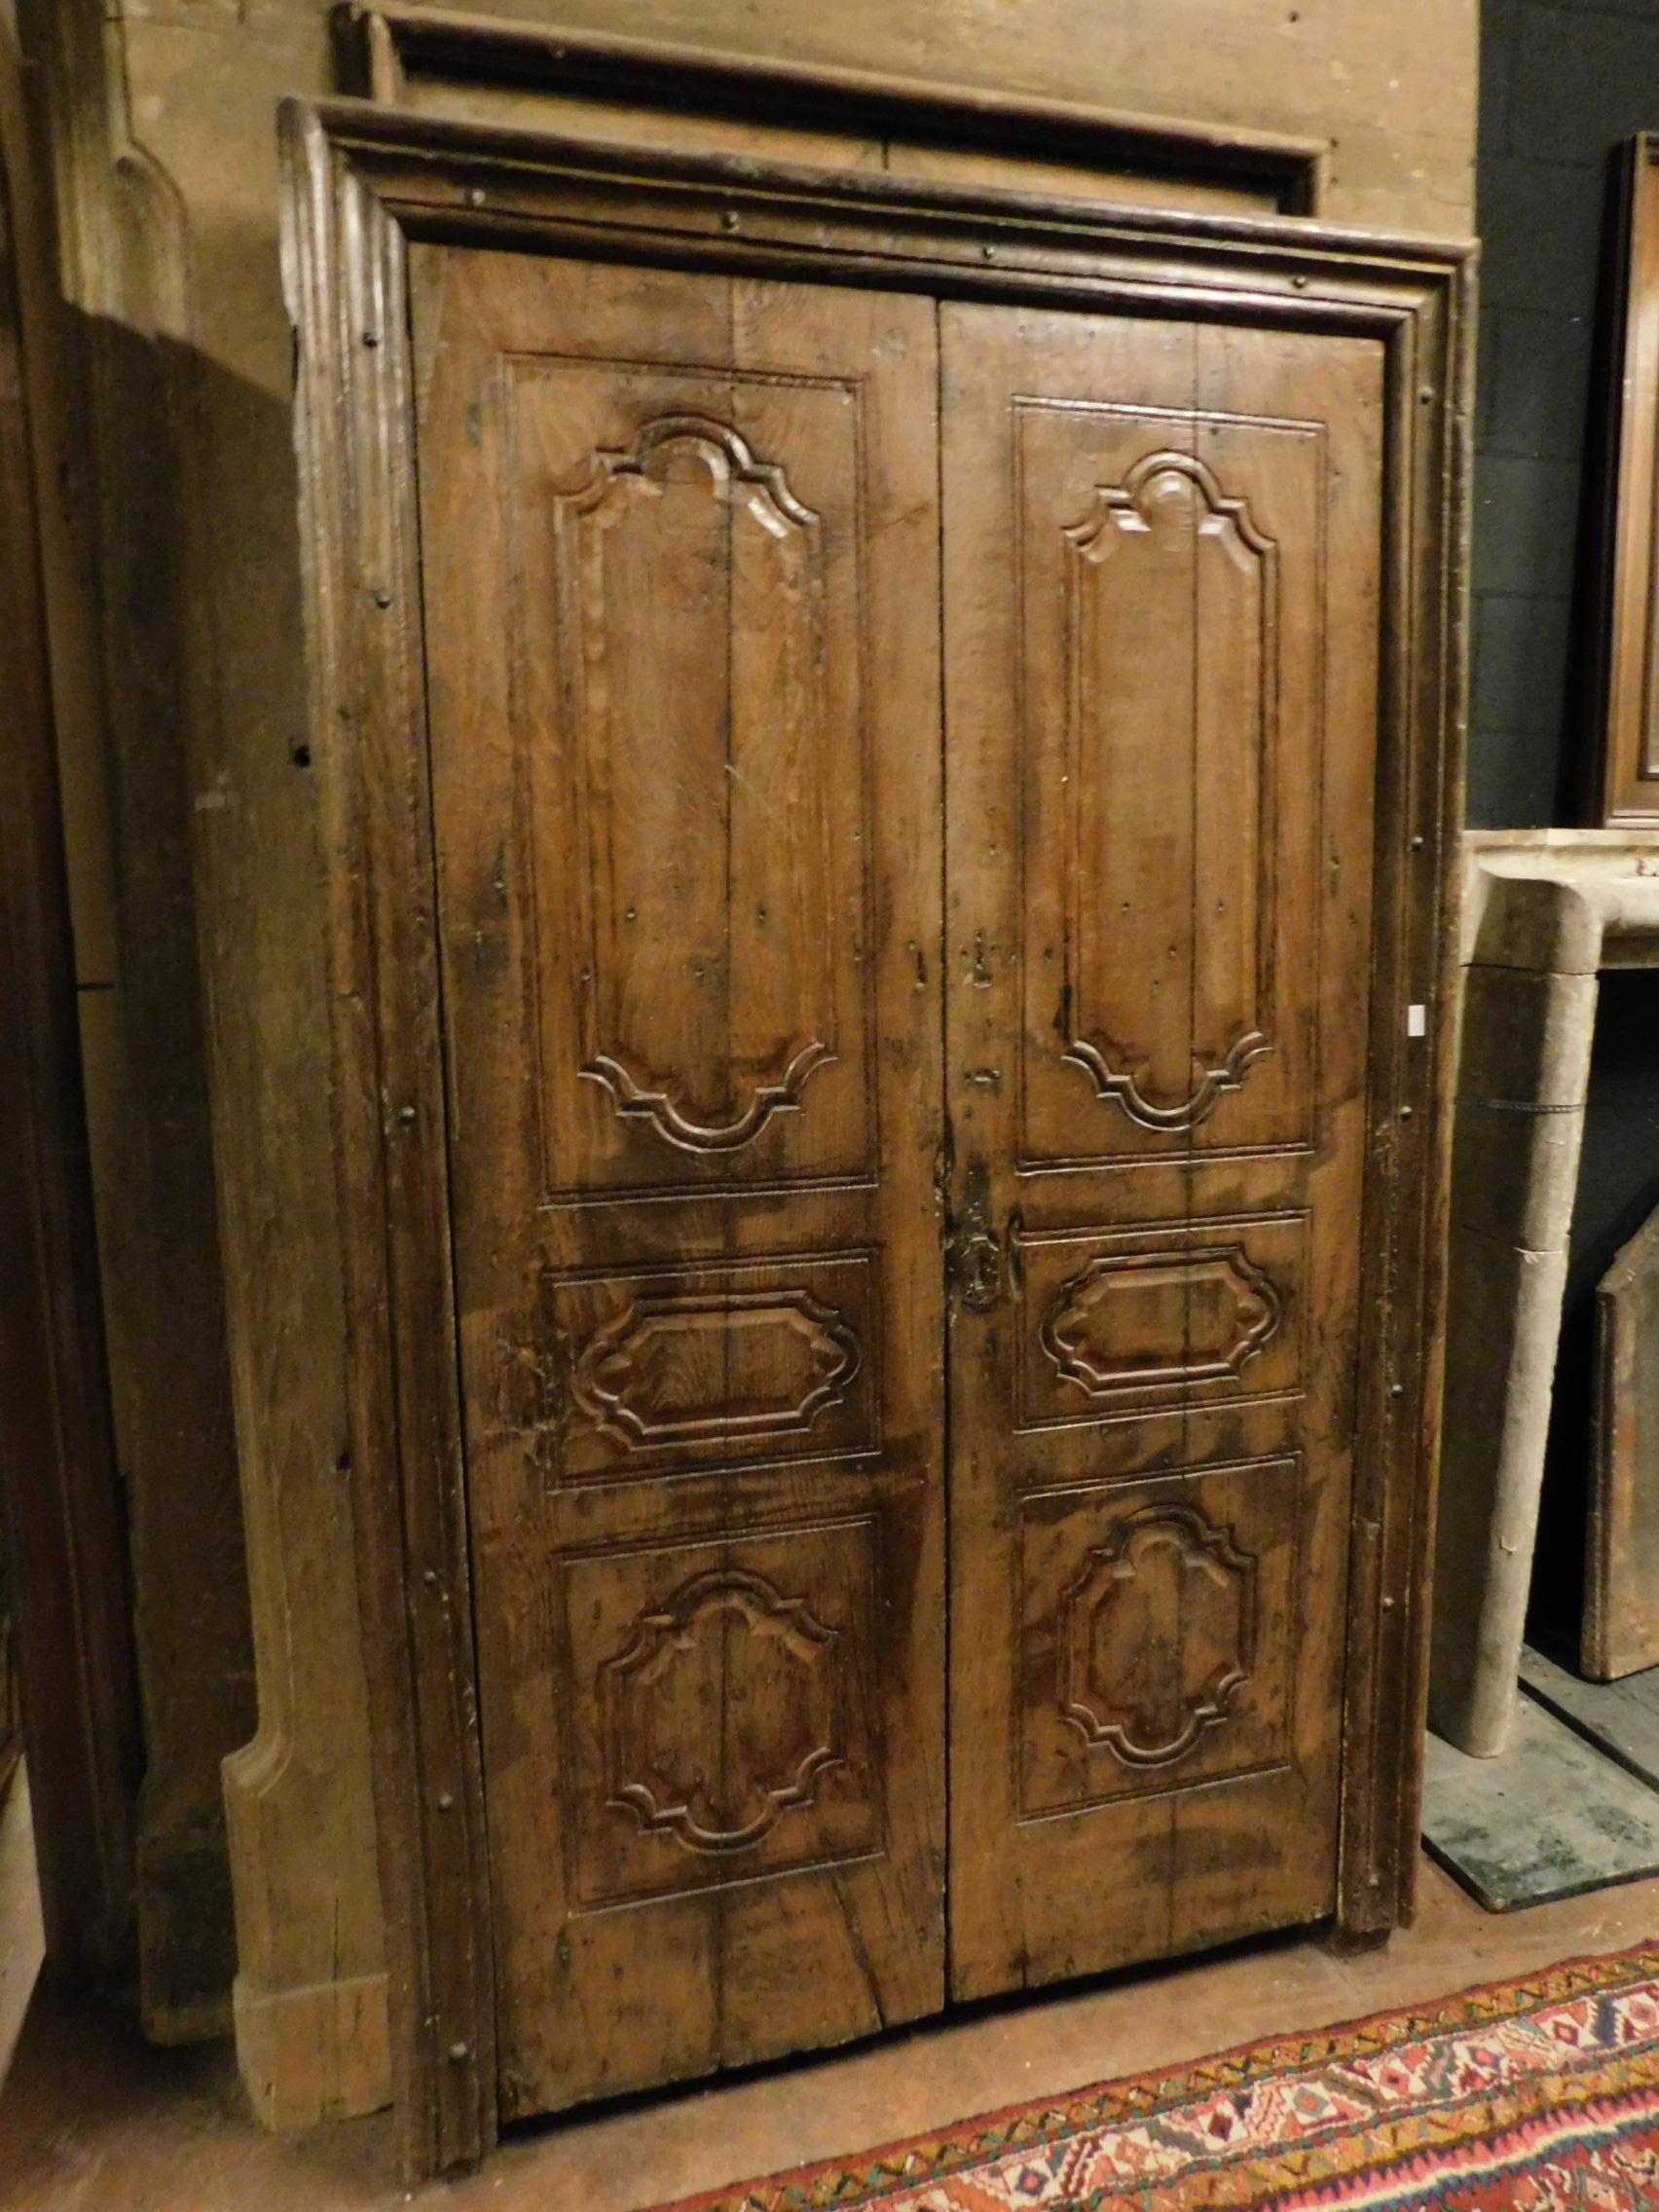 18th century Ancient chestnut wood door with original frame, original irons, from historic Piedmontese palace in Italy, precious workmanship and typical Baroque shape.
Elegant and elegant, it is in harmony with classic furnishings, but with a nice